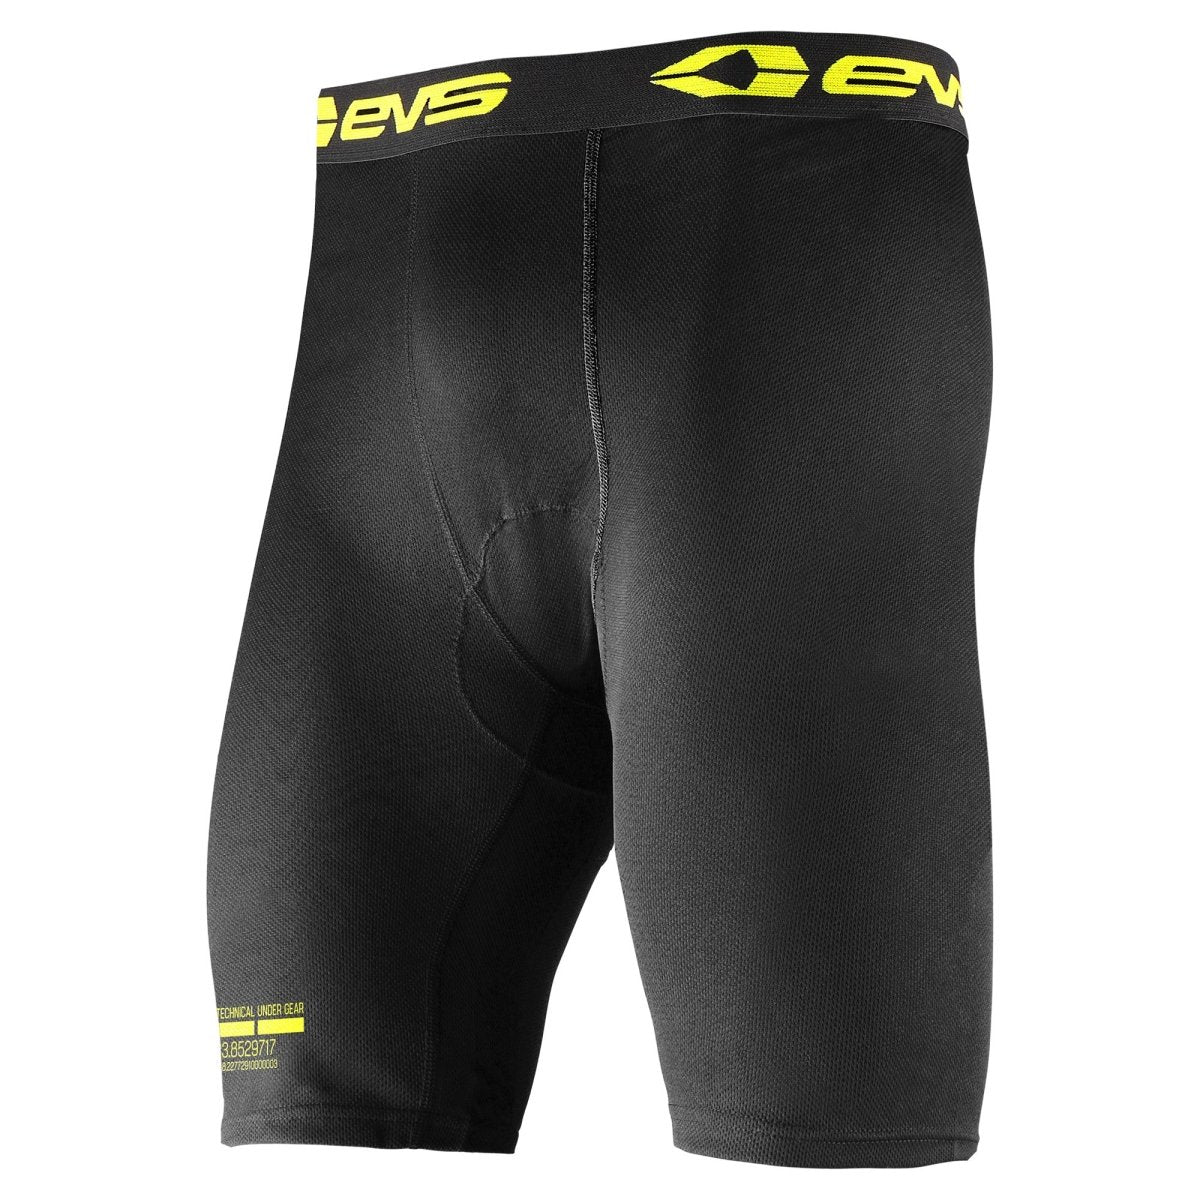 EVS - VENTED SHORTS - 663-4255S - 680196778756